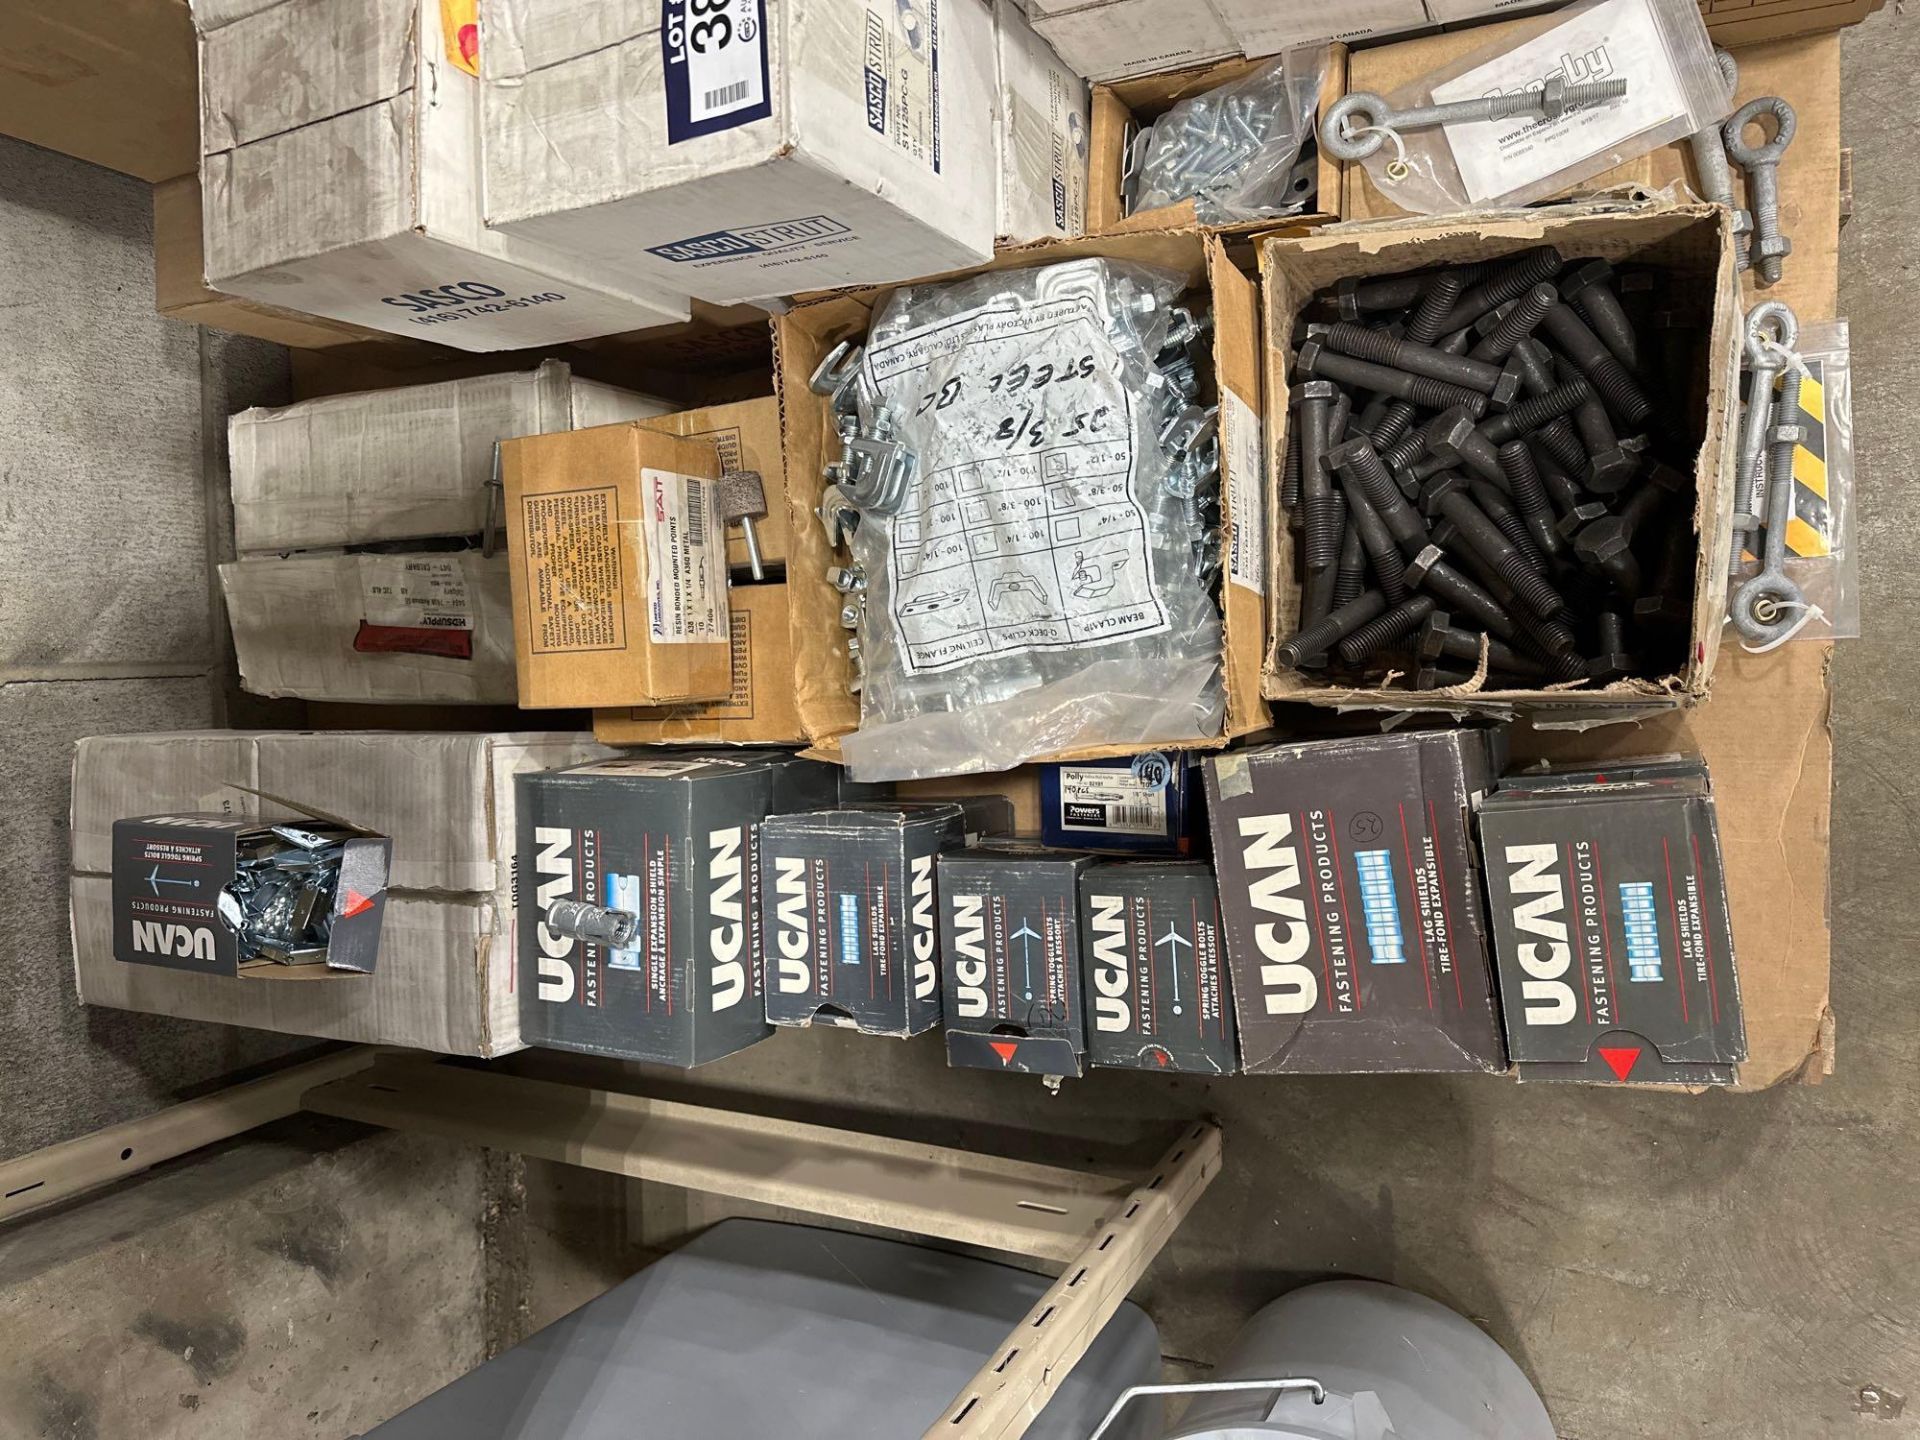 Pallet of Asst. Fasteners including Asst. Bolts, Pipe Clamps, Lag Shields, etc. - Image 5 of 6